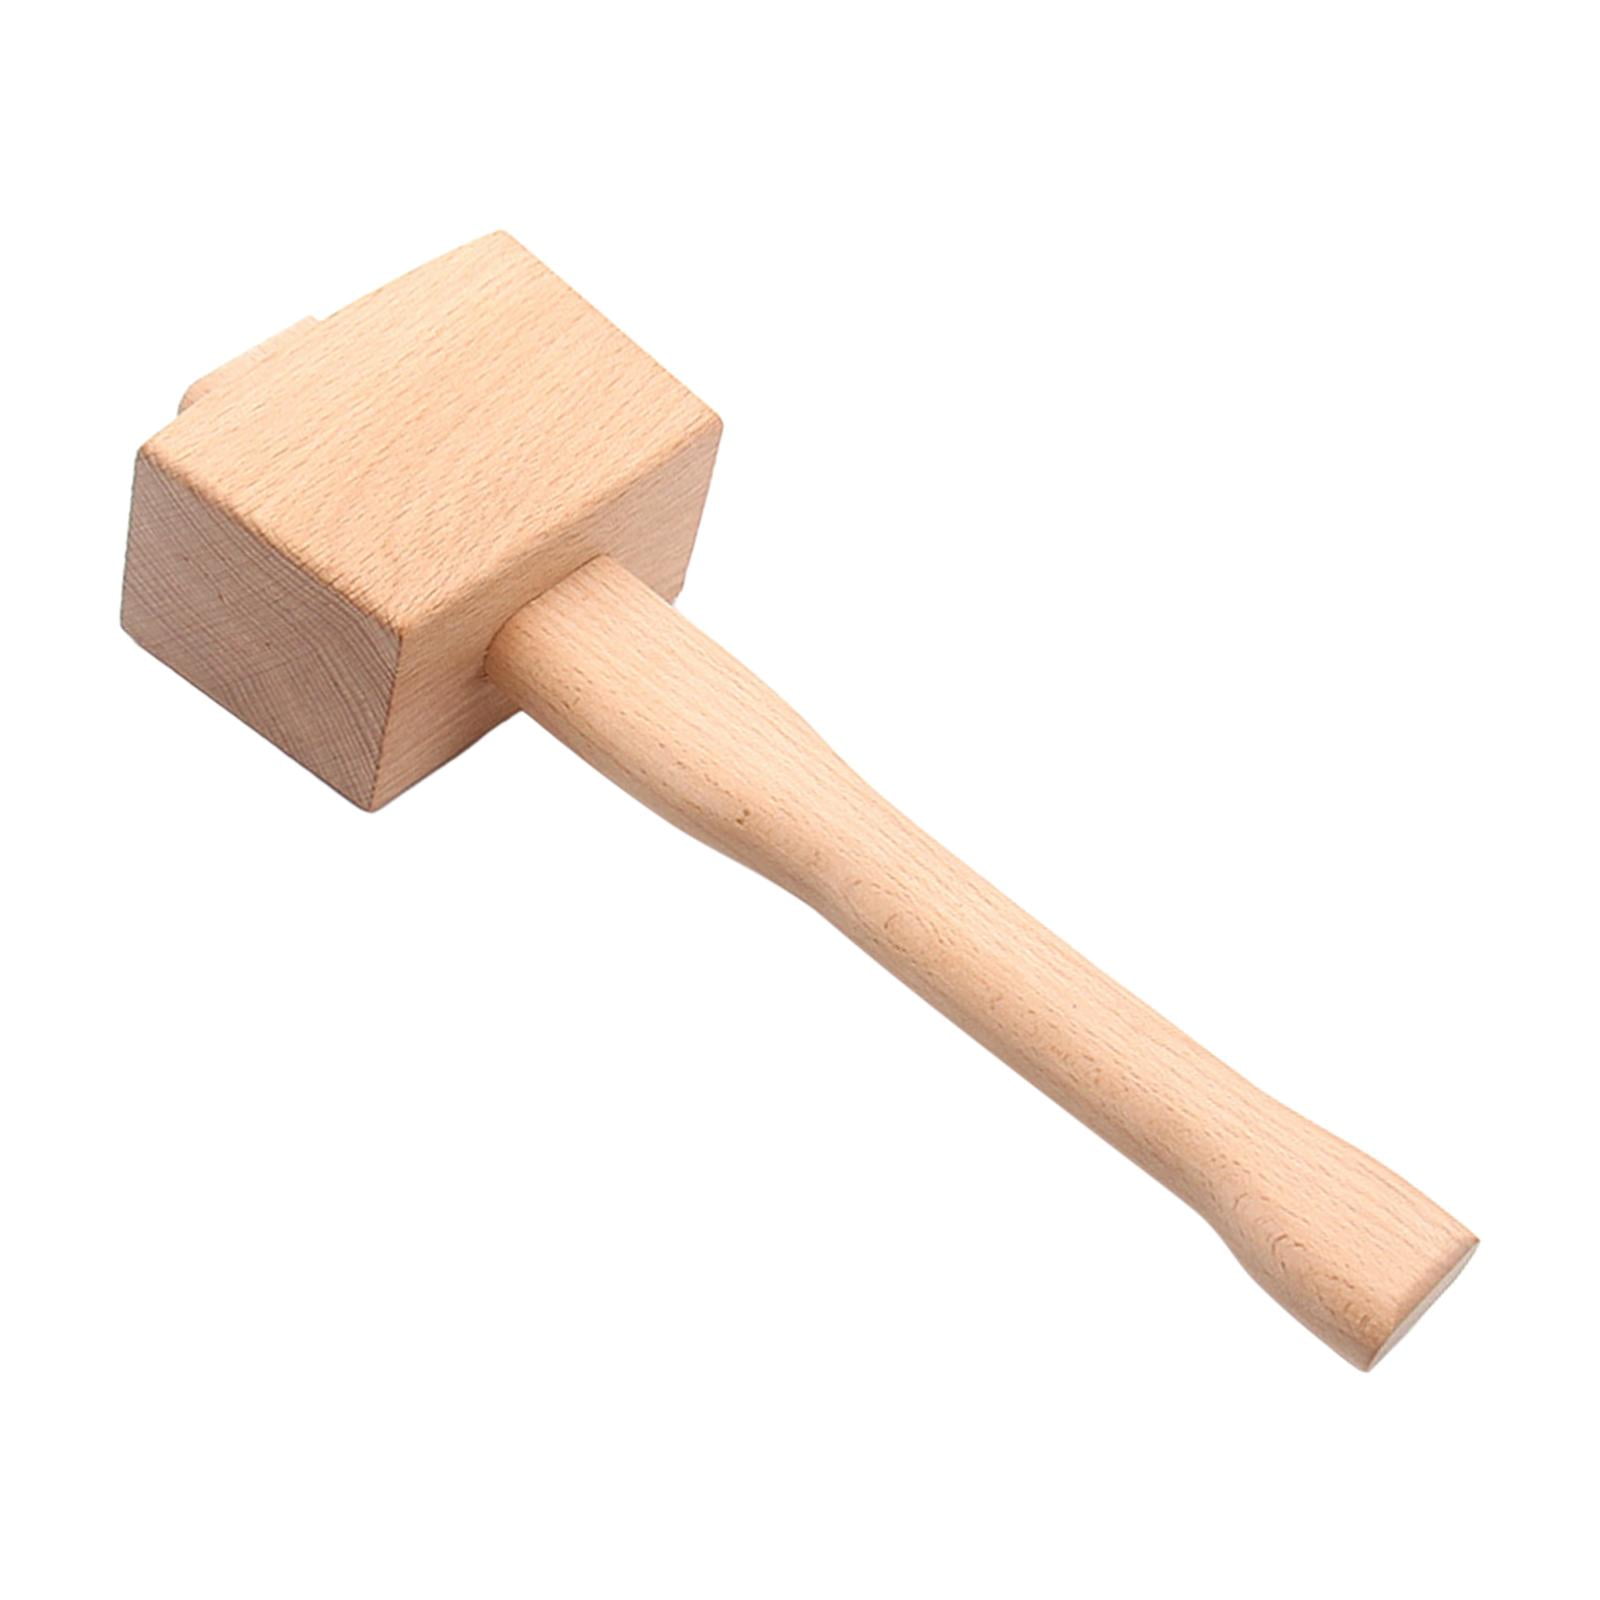 Generic Moovul 250mm Wooden Mallet, Beech Solid Carpenter Wood Hammer  Handle Woodworking Tool 2584cm, Wood color